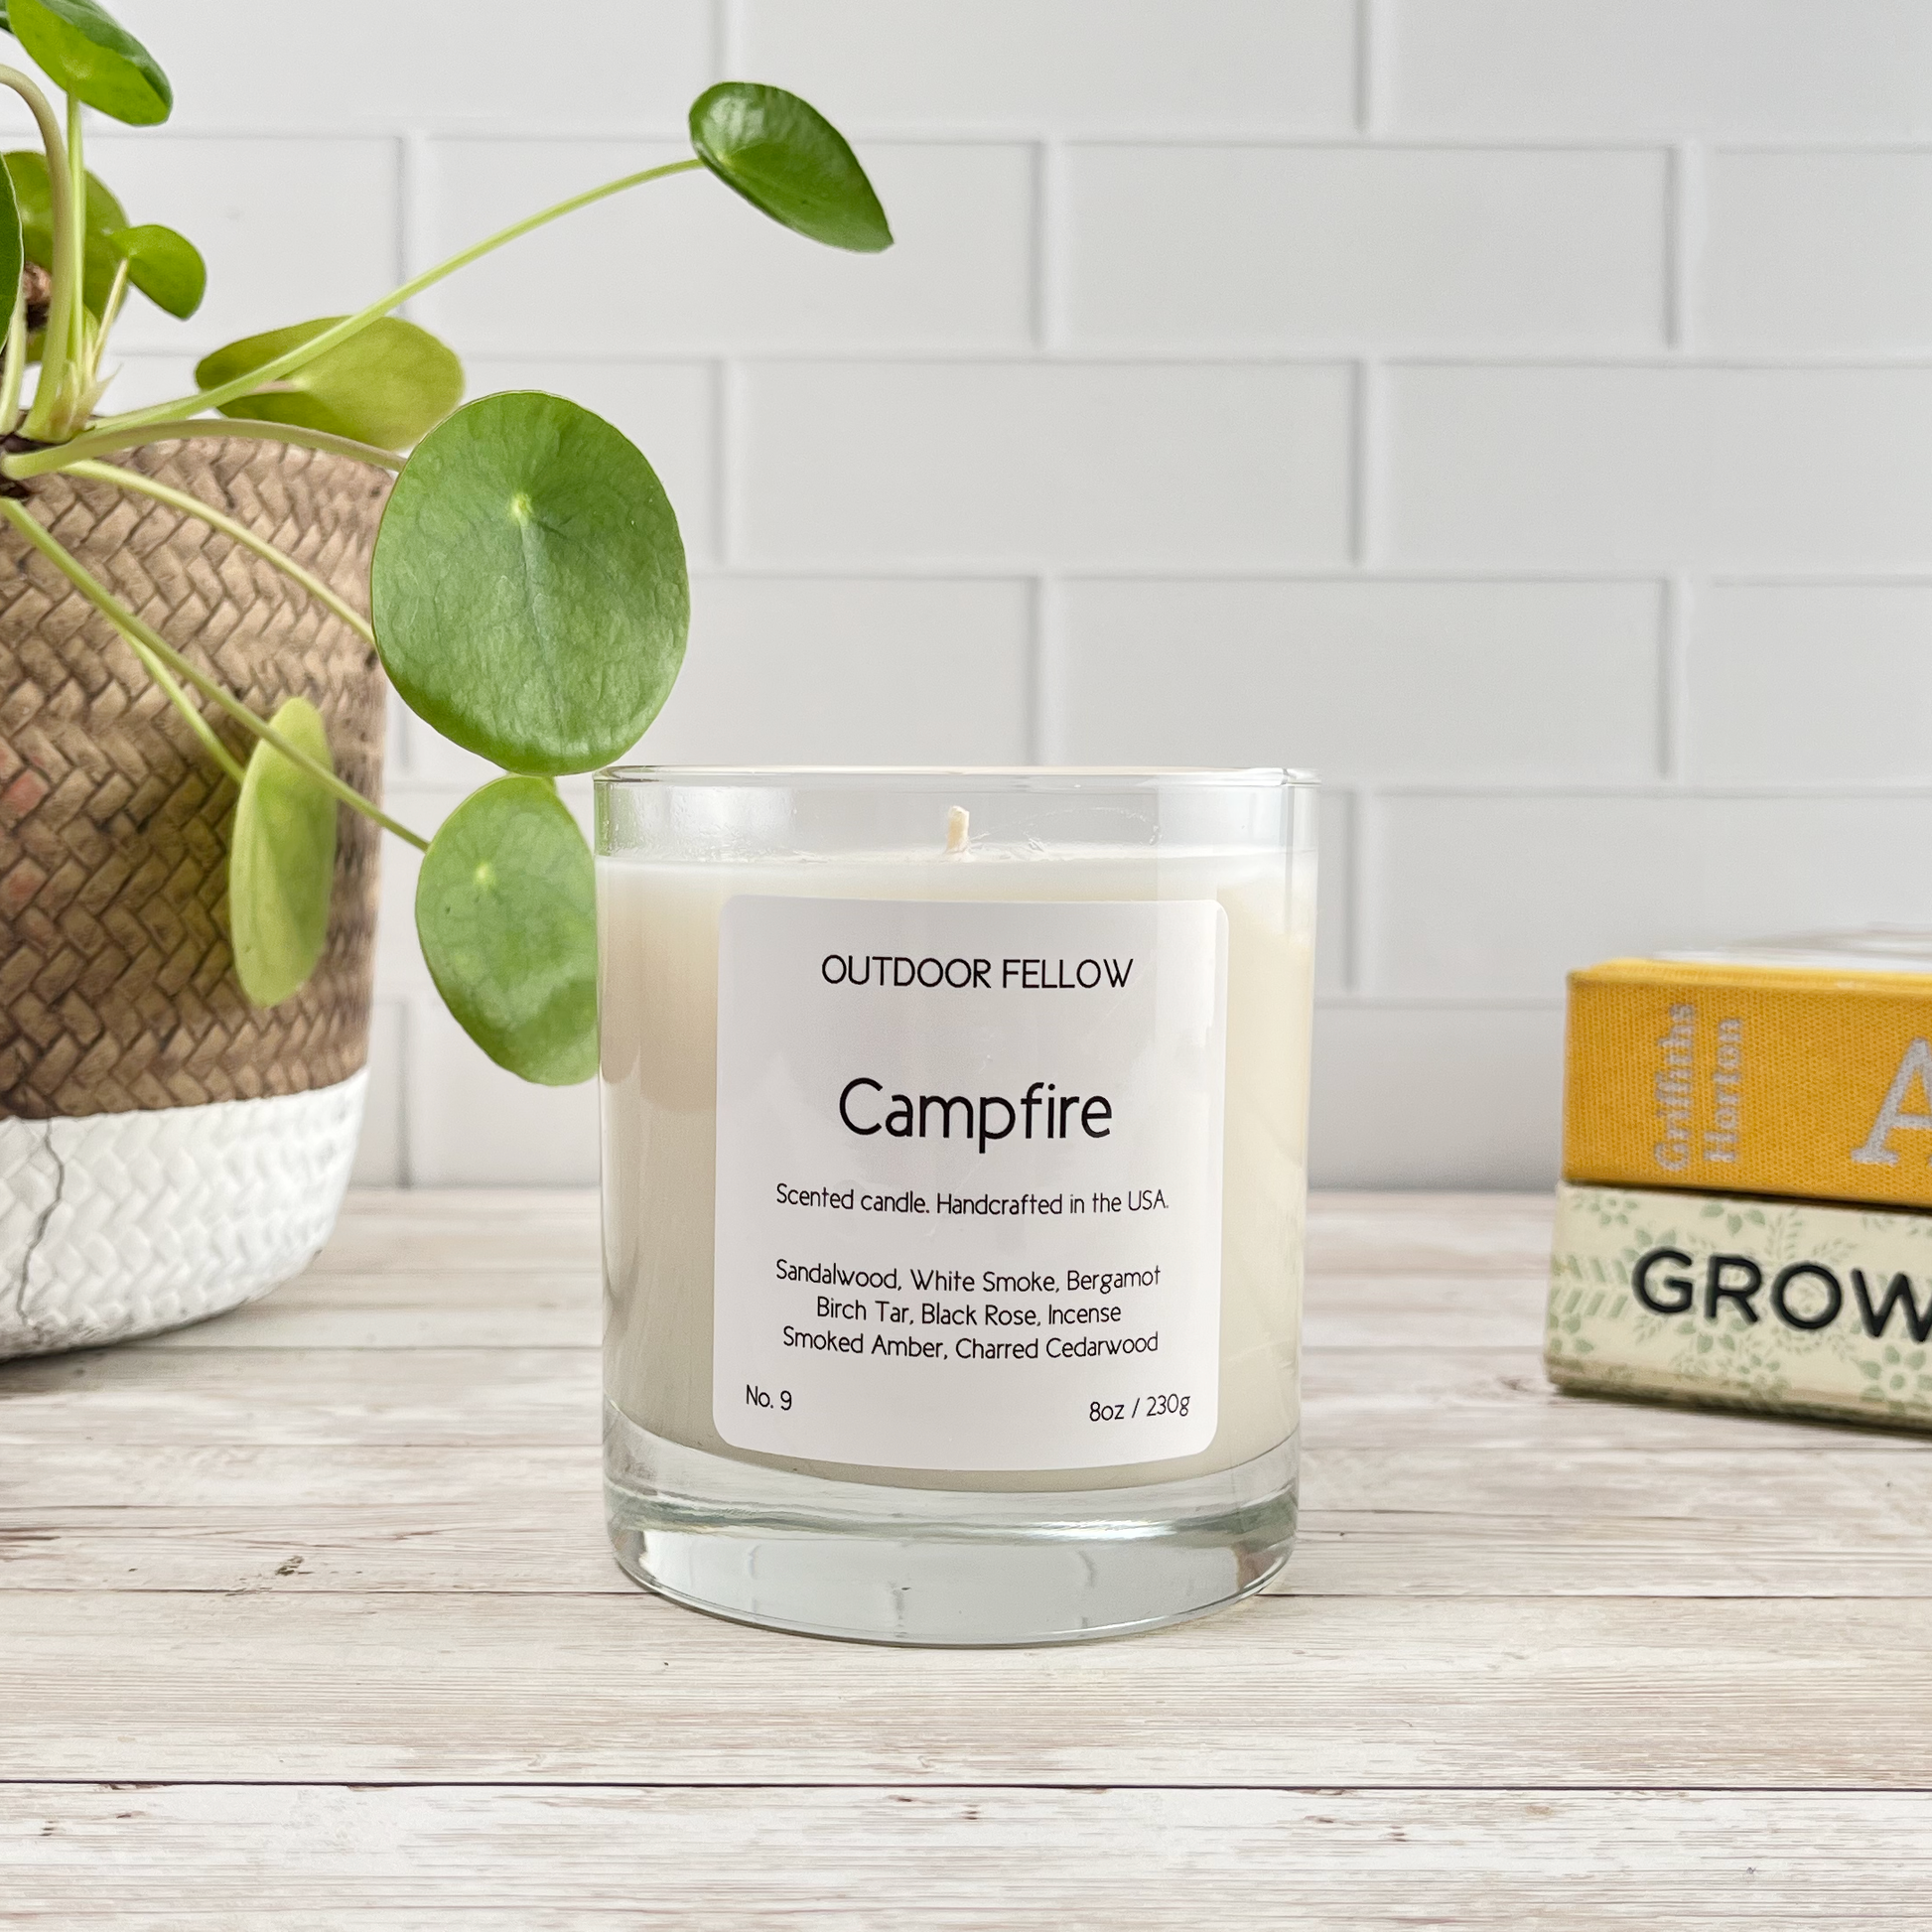 Campfire scented candle